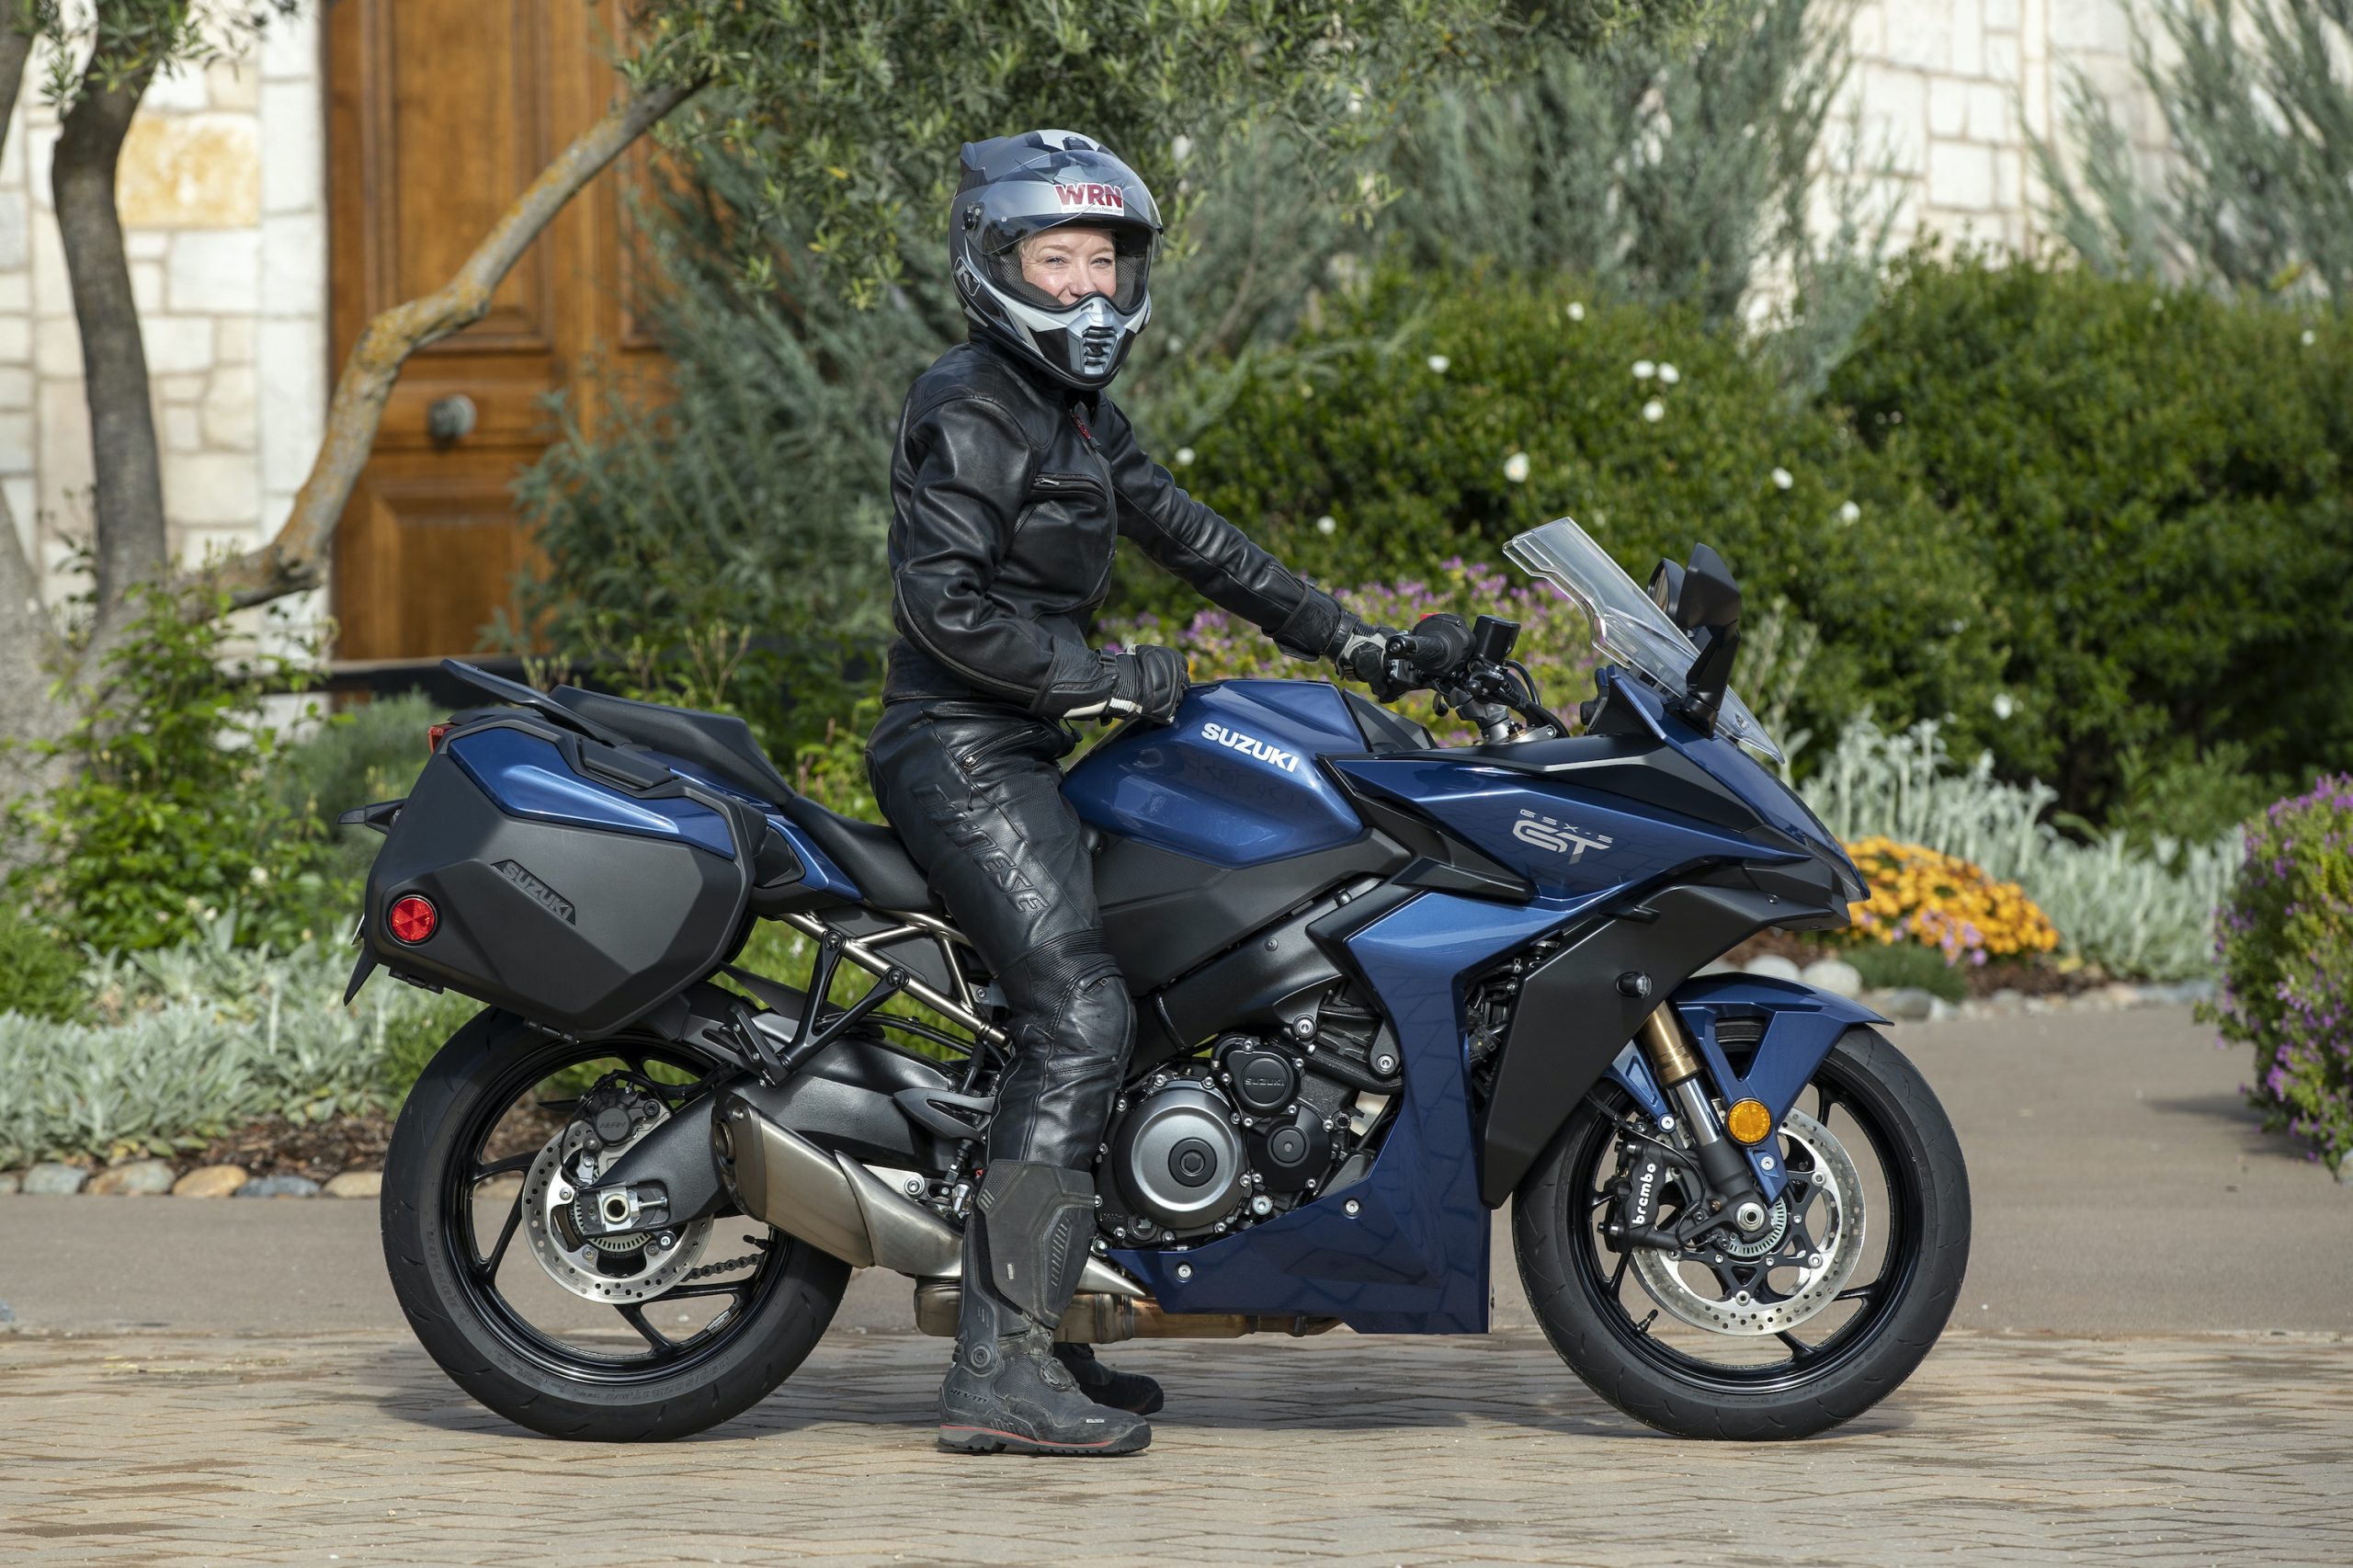 I’m 5 feet 7 inches tall and have a 31.5-inch inseam. The GT+’s 31.9-inch seat height allows me to easily “flat foot” both feet while sitting on the bike.